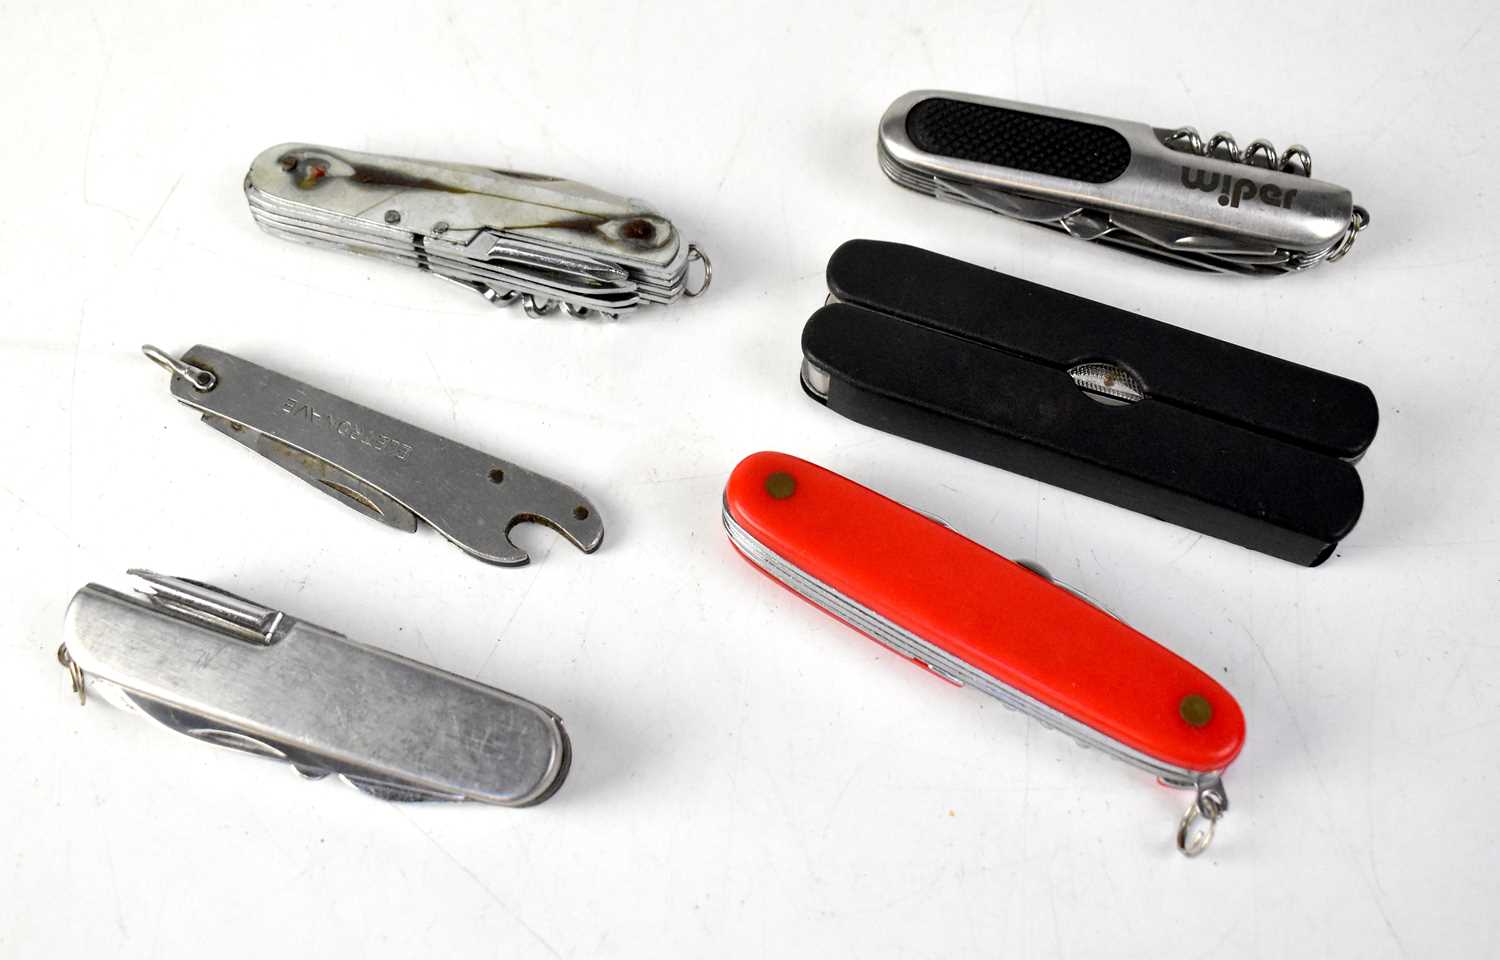 Six various knives and multitools.